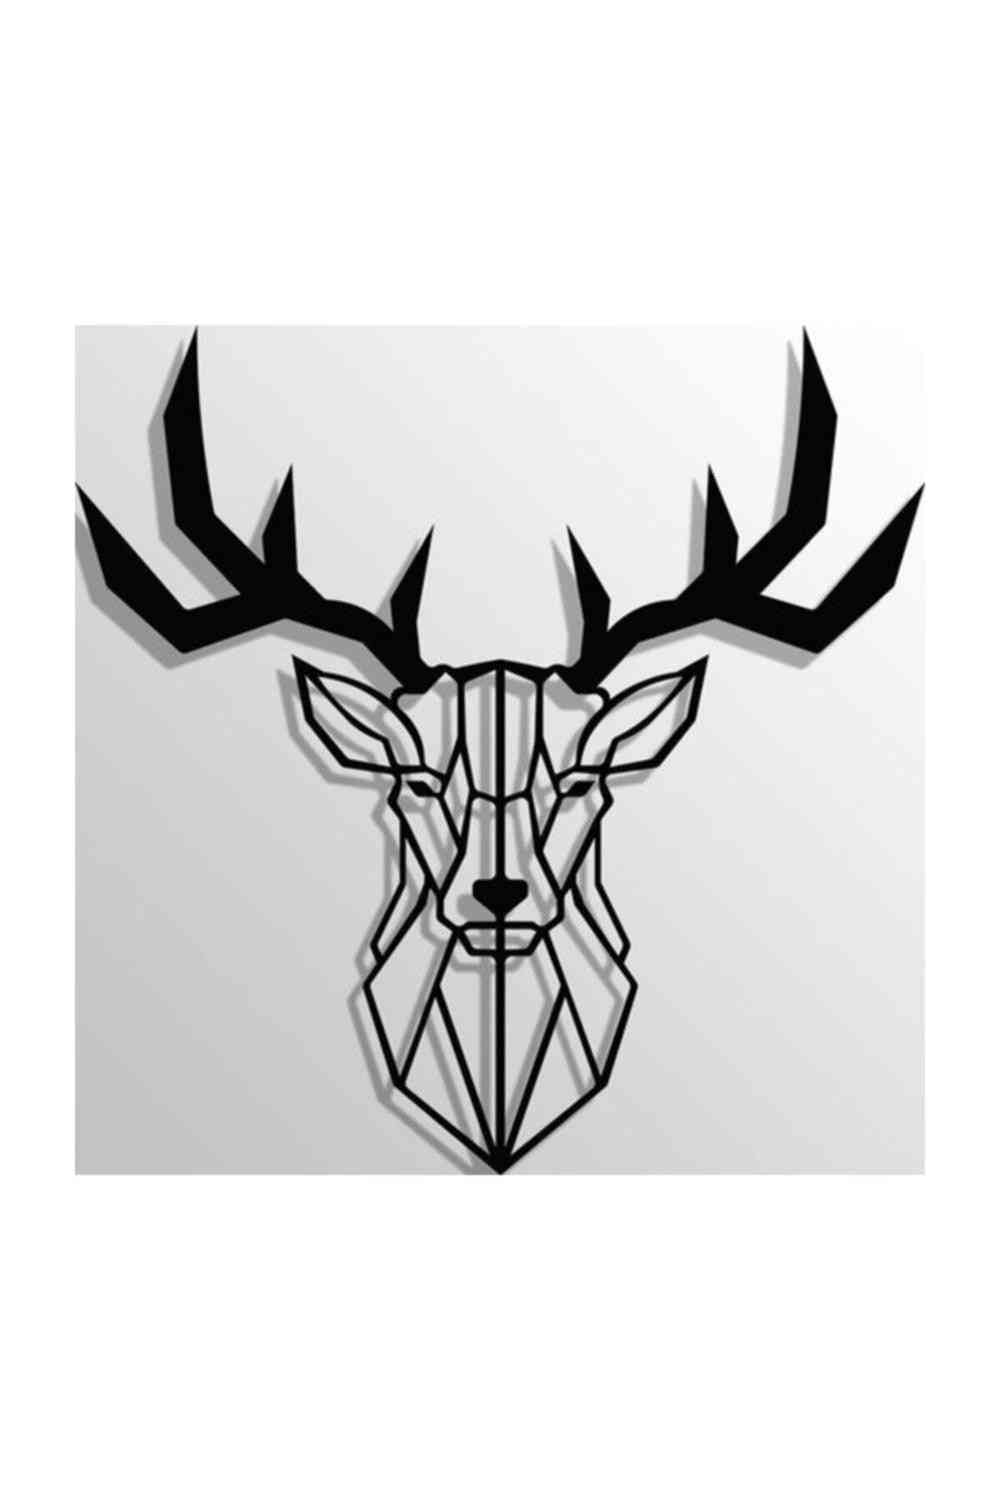 Wooden Decorative- Deer Head Table, Wall Accessories Stylish Design With Light